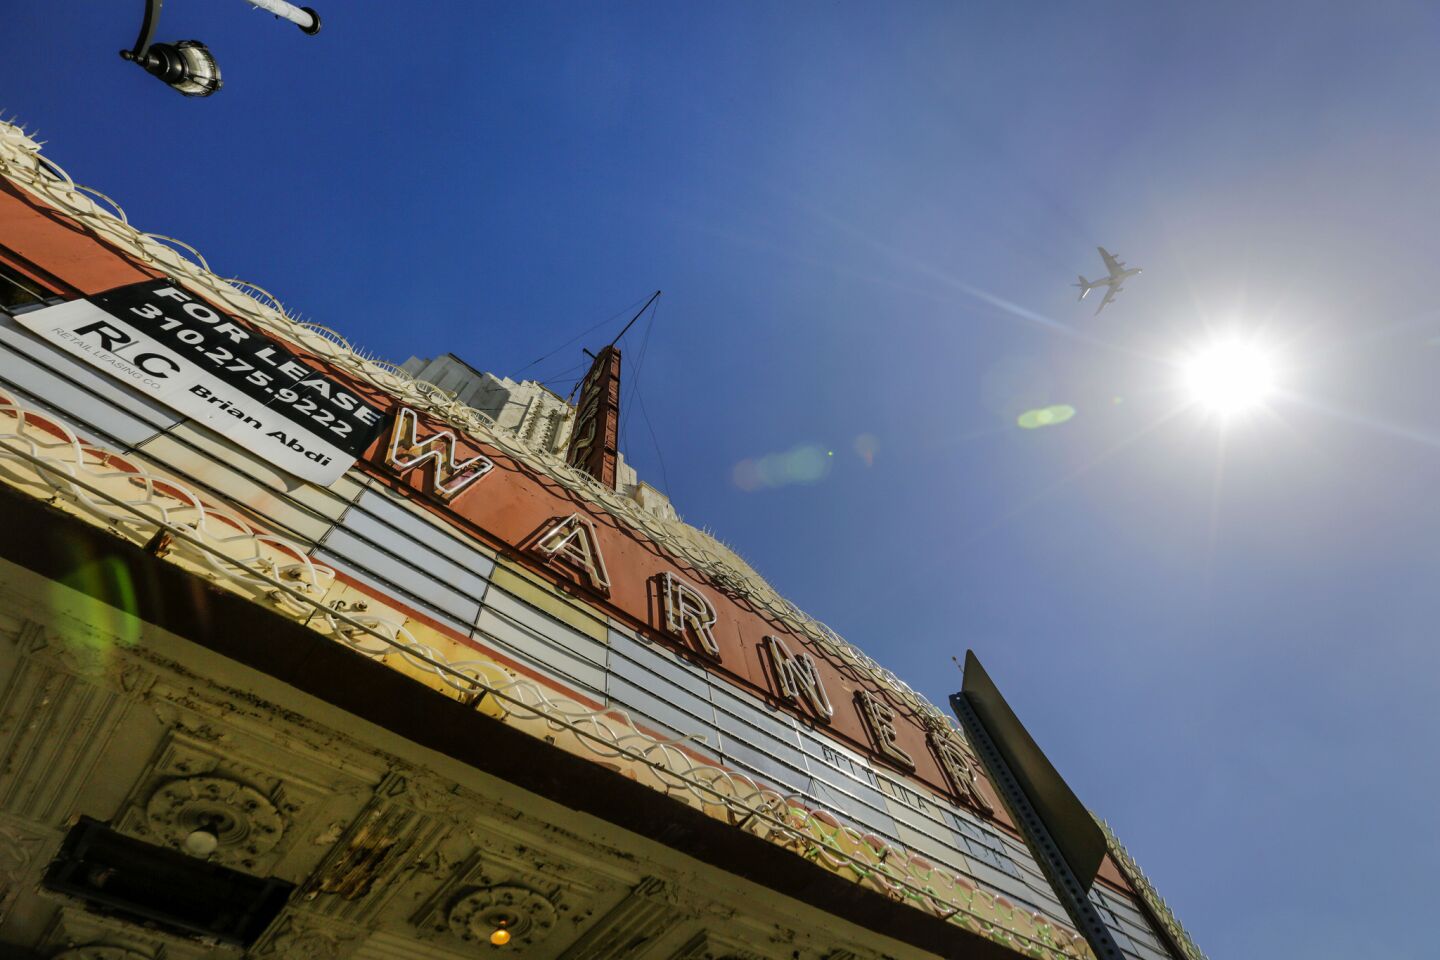 A "for lease" sign hangs on the Warner theater on Pacific Boulevard in Huntington Park.